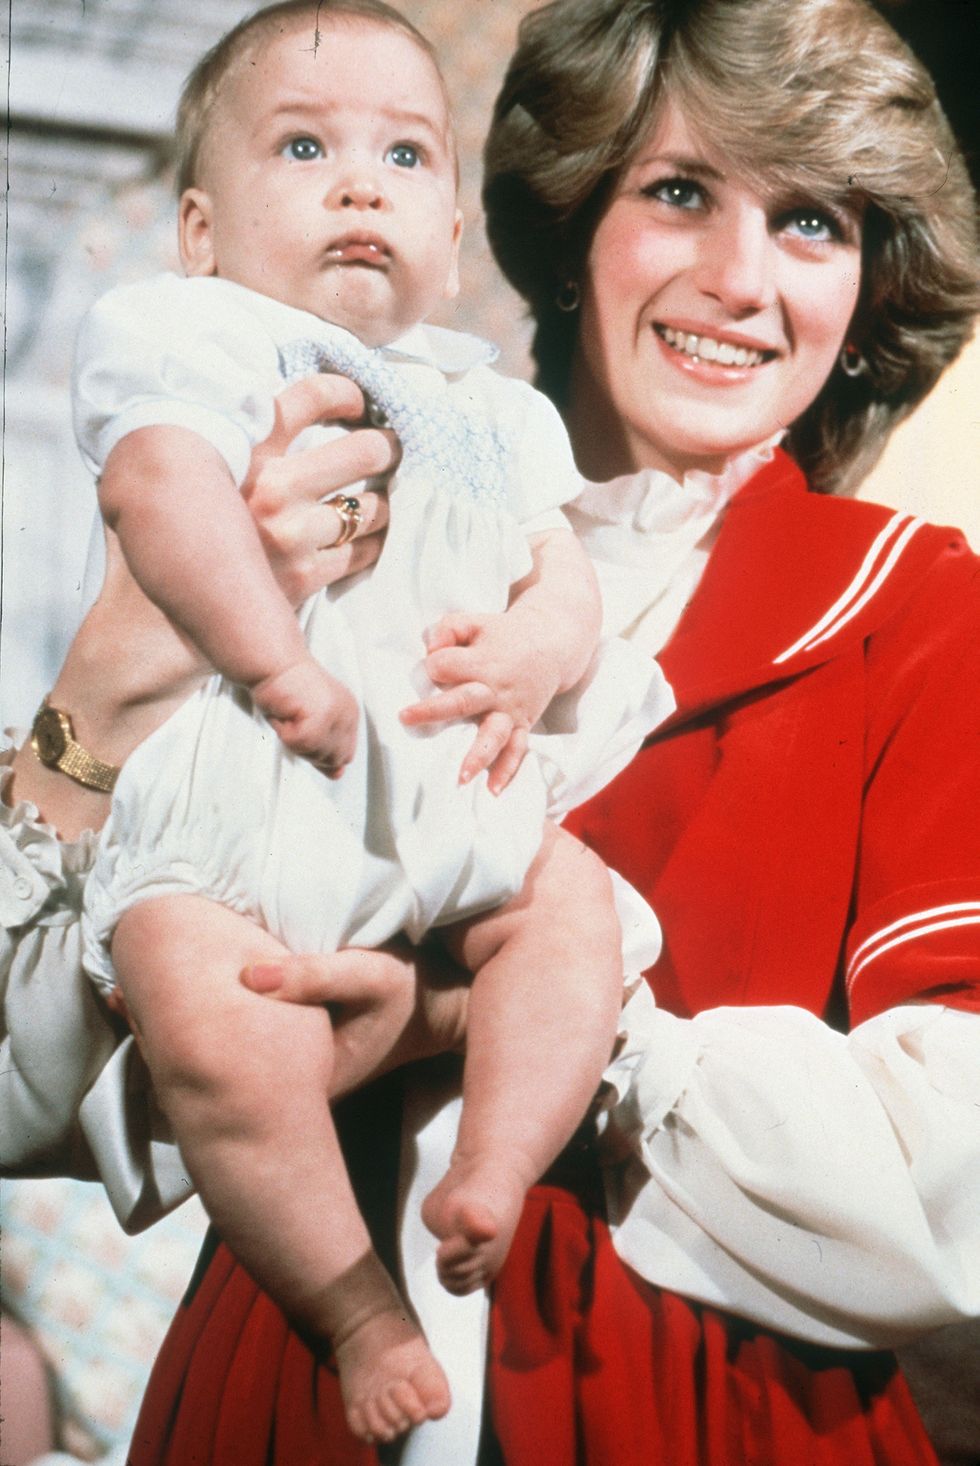 diana, princess of wales with baby prince williamduring the christmas season at kensington palace, london, england, december 1982 photo by anwar husseinwireimage